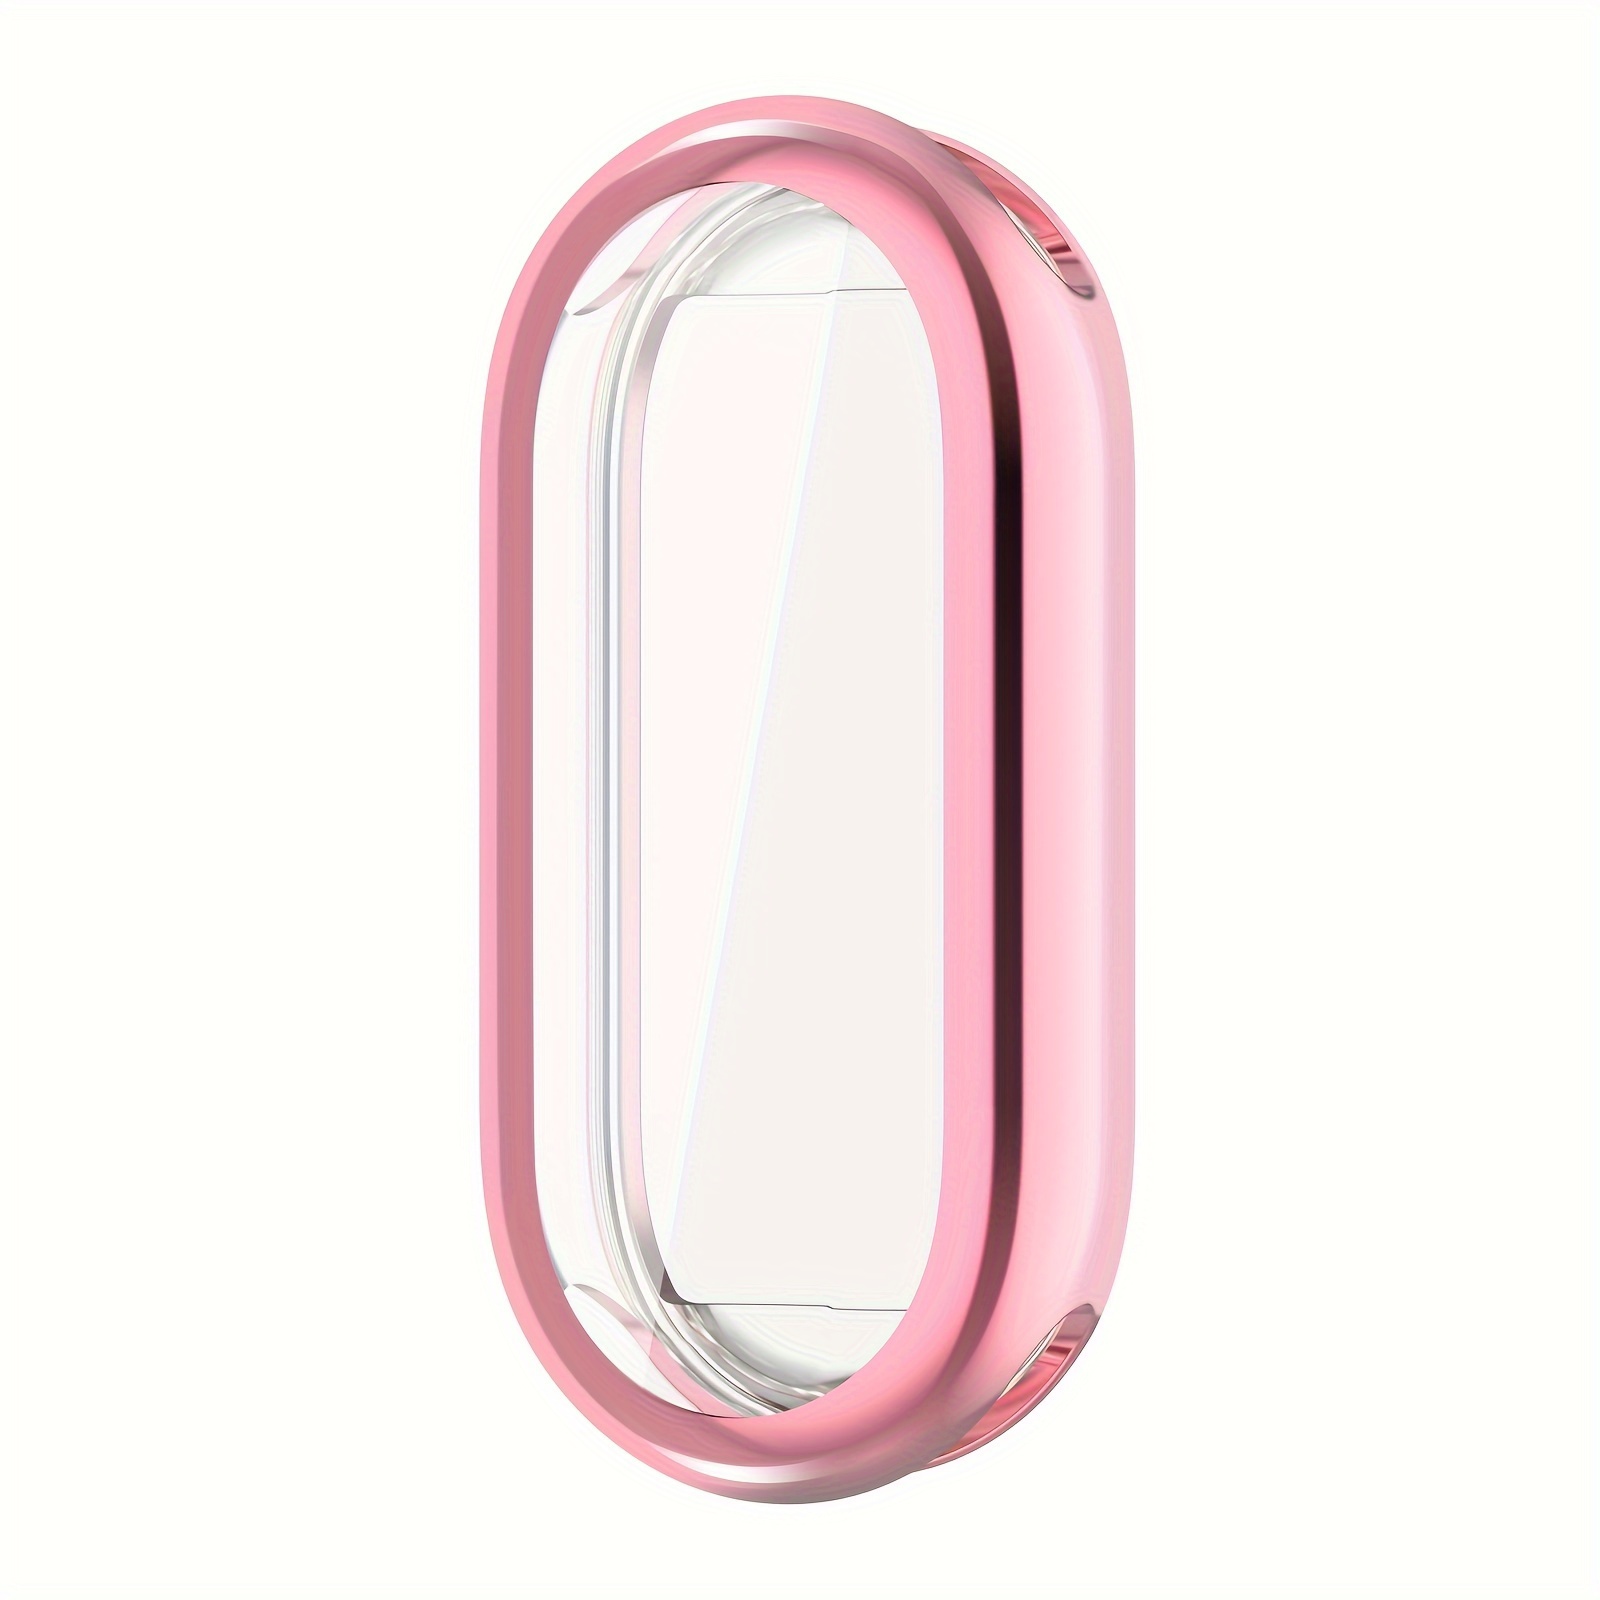 Protect Screen Protector Soft TPU Case Cover Shell for Mi Band 8 Smartwatch  